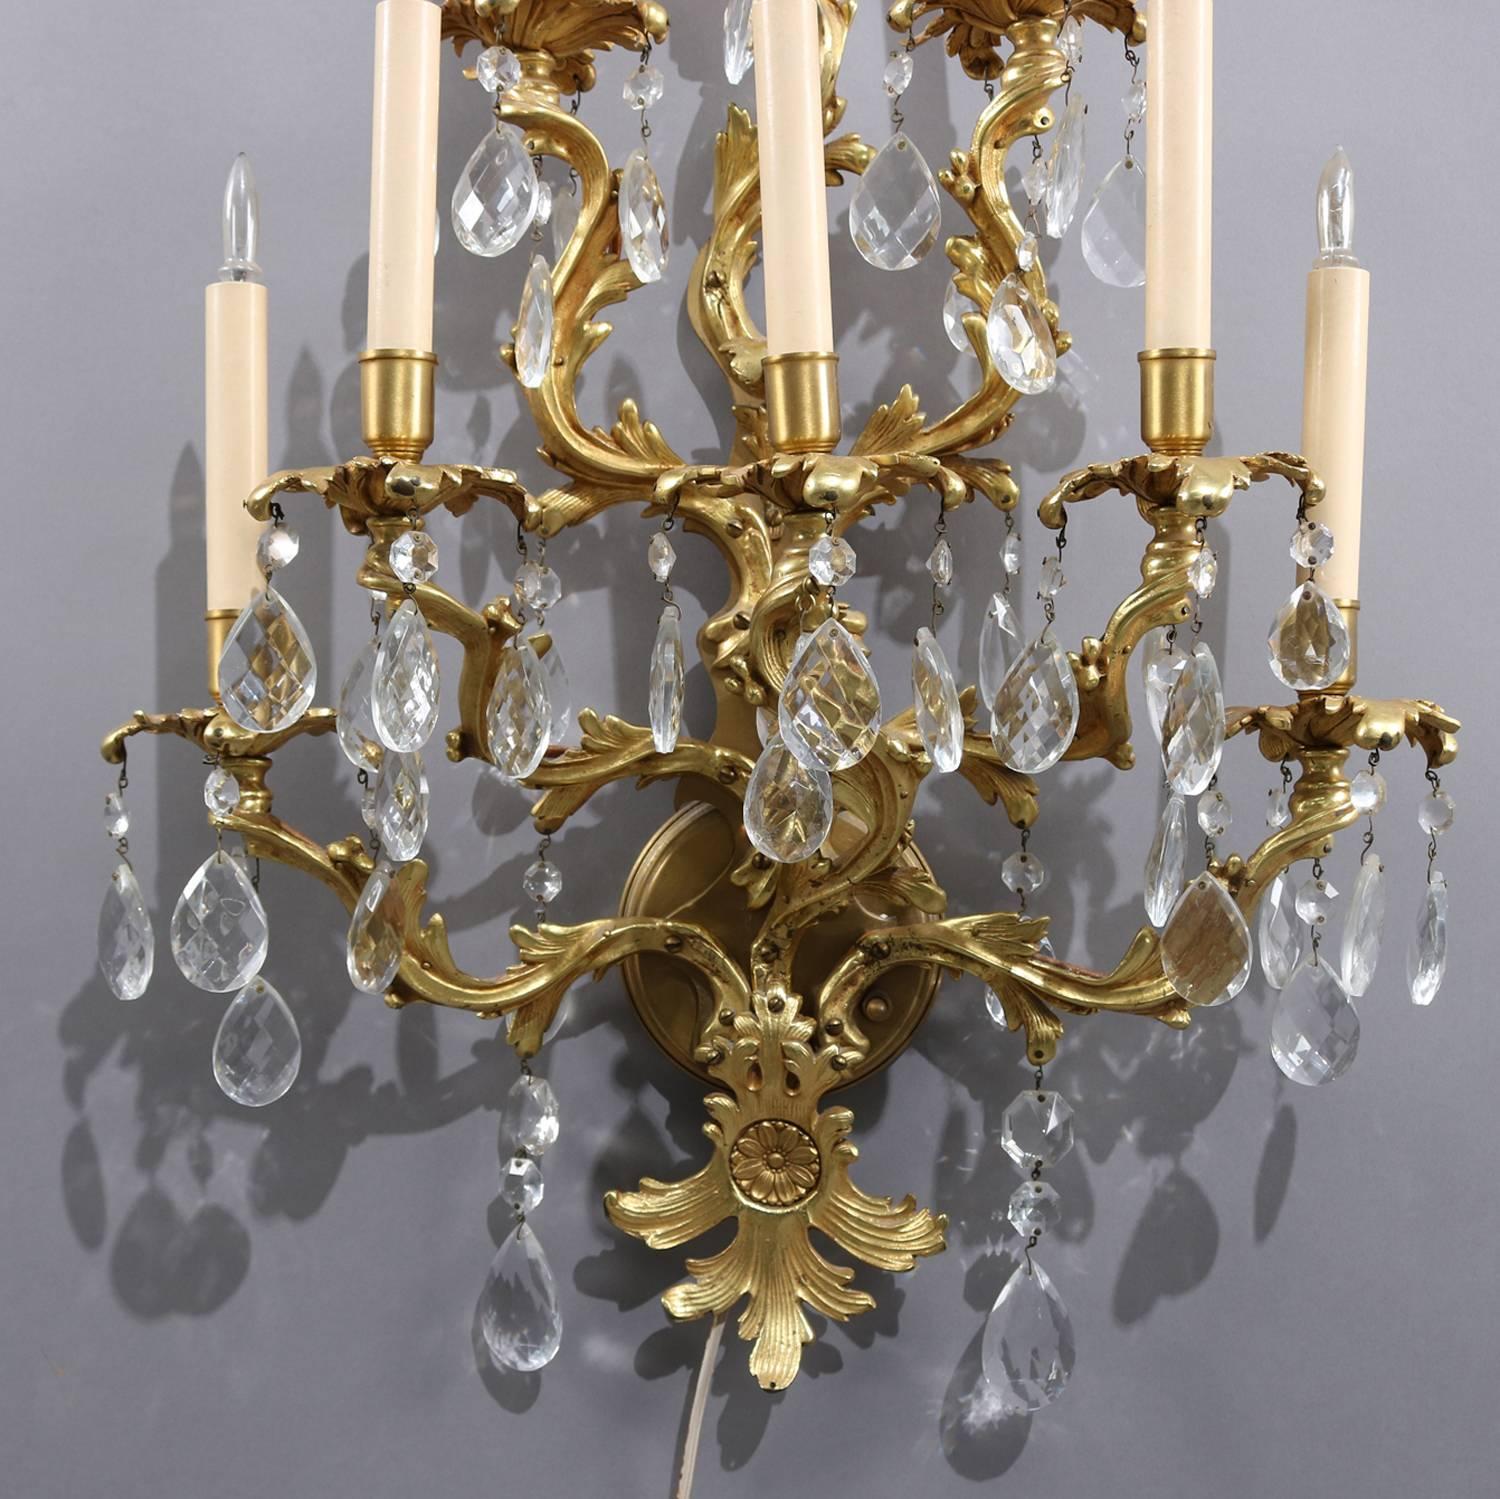 Metal Oversized French Rococo Foliate Form Gilt Bronze Cut Crystal Wall Sconces